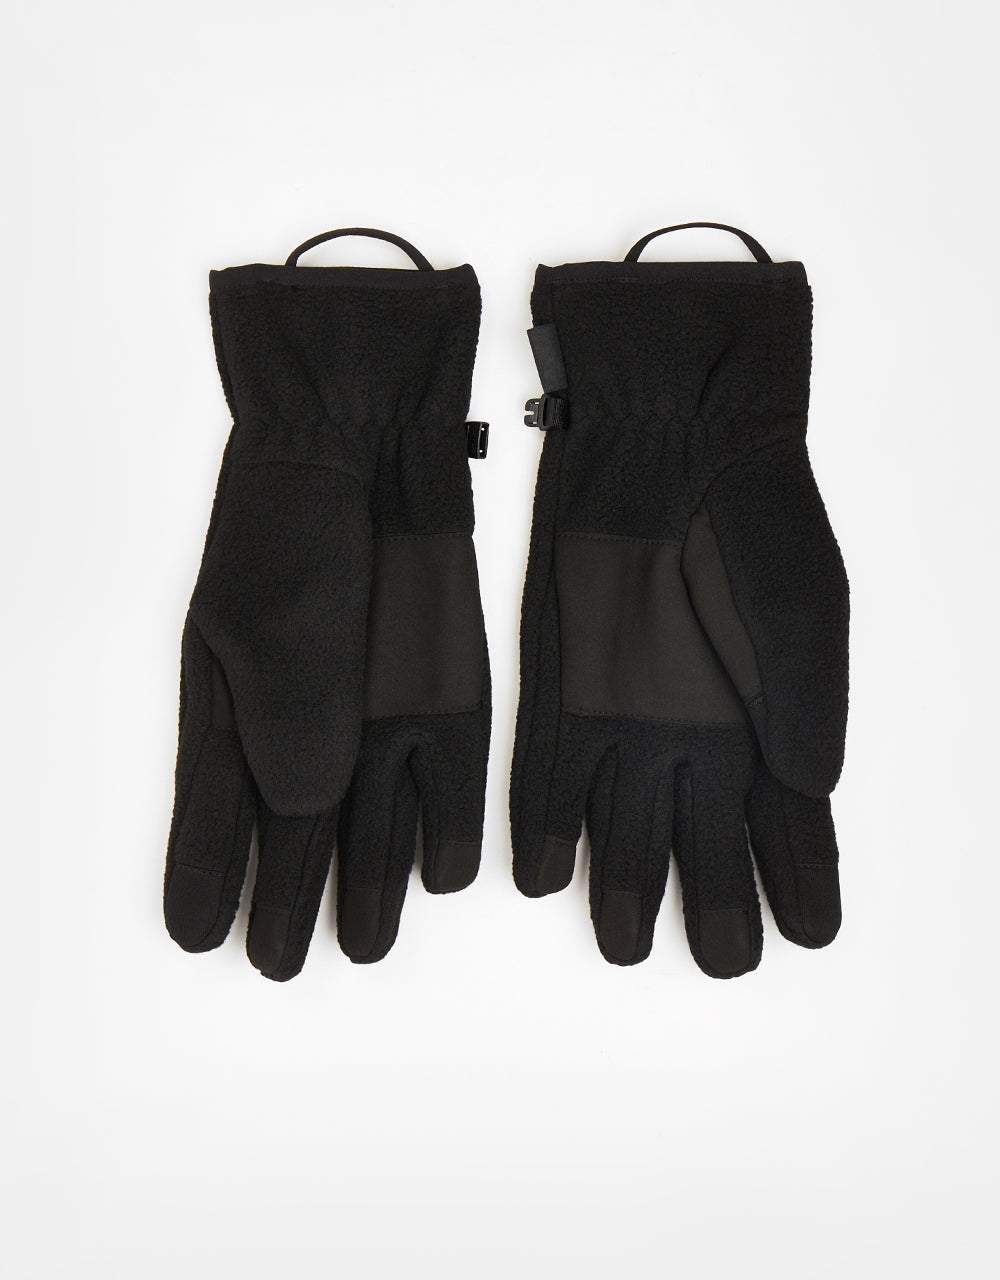 Patagonia Synch Gloves - Black